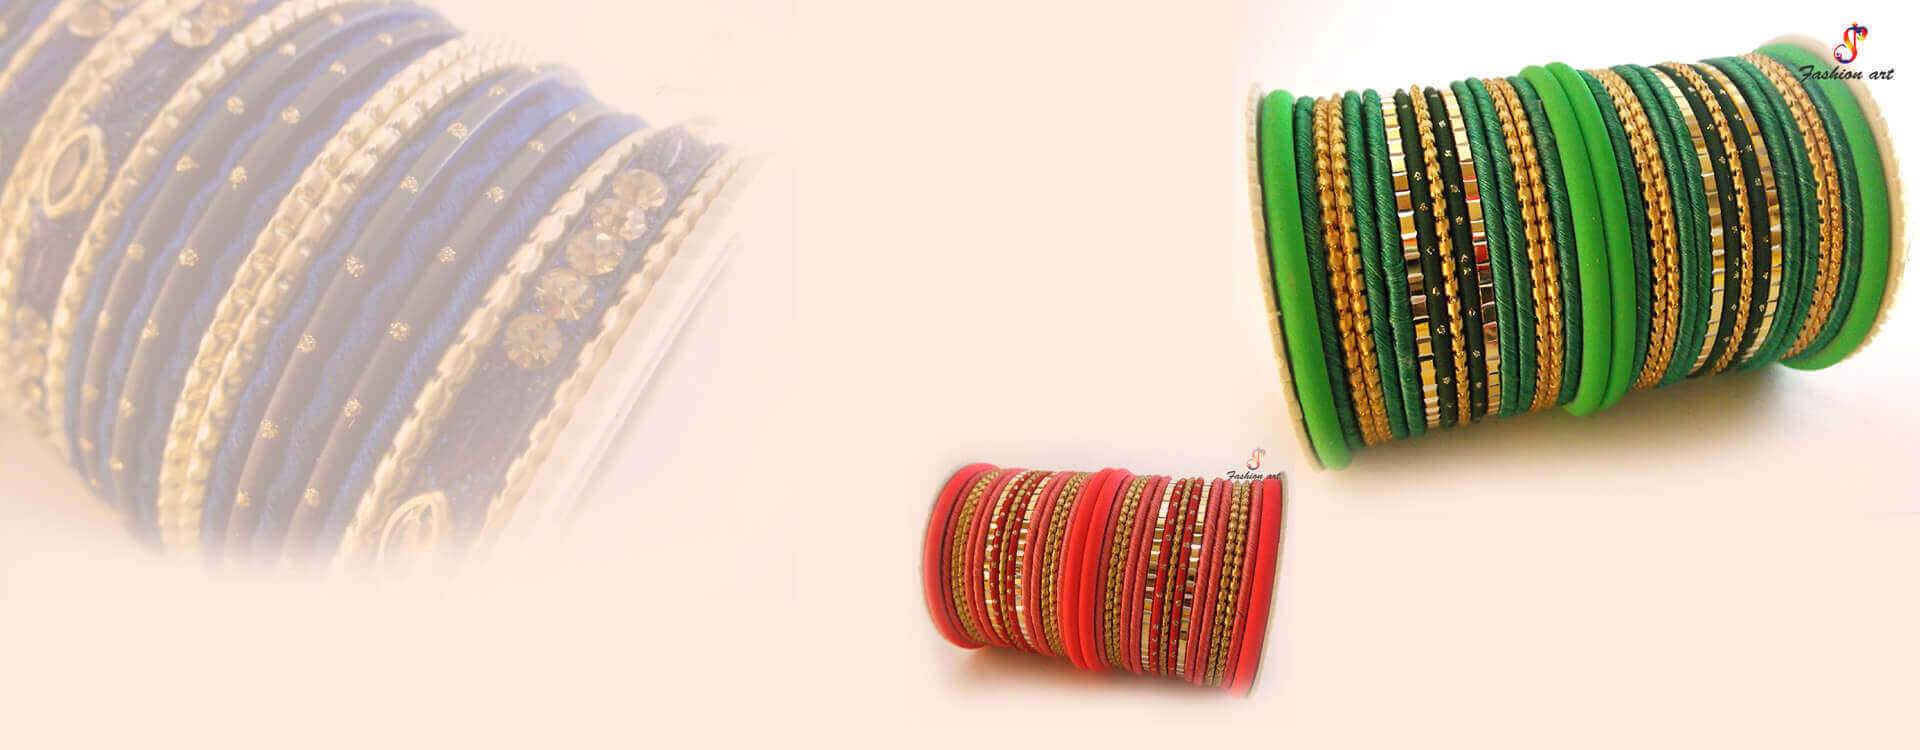 An exquisite collection of designer bangles